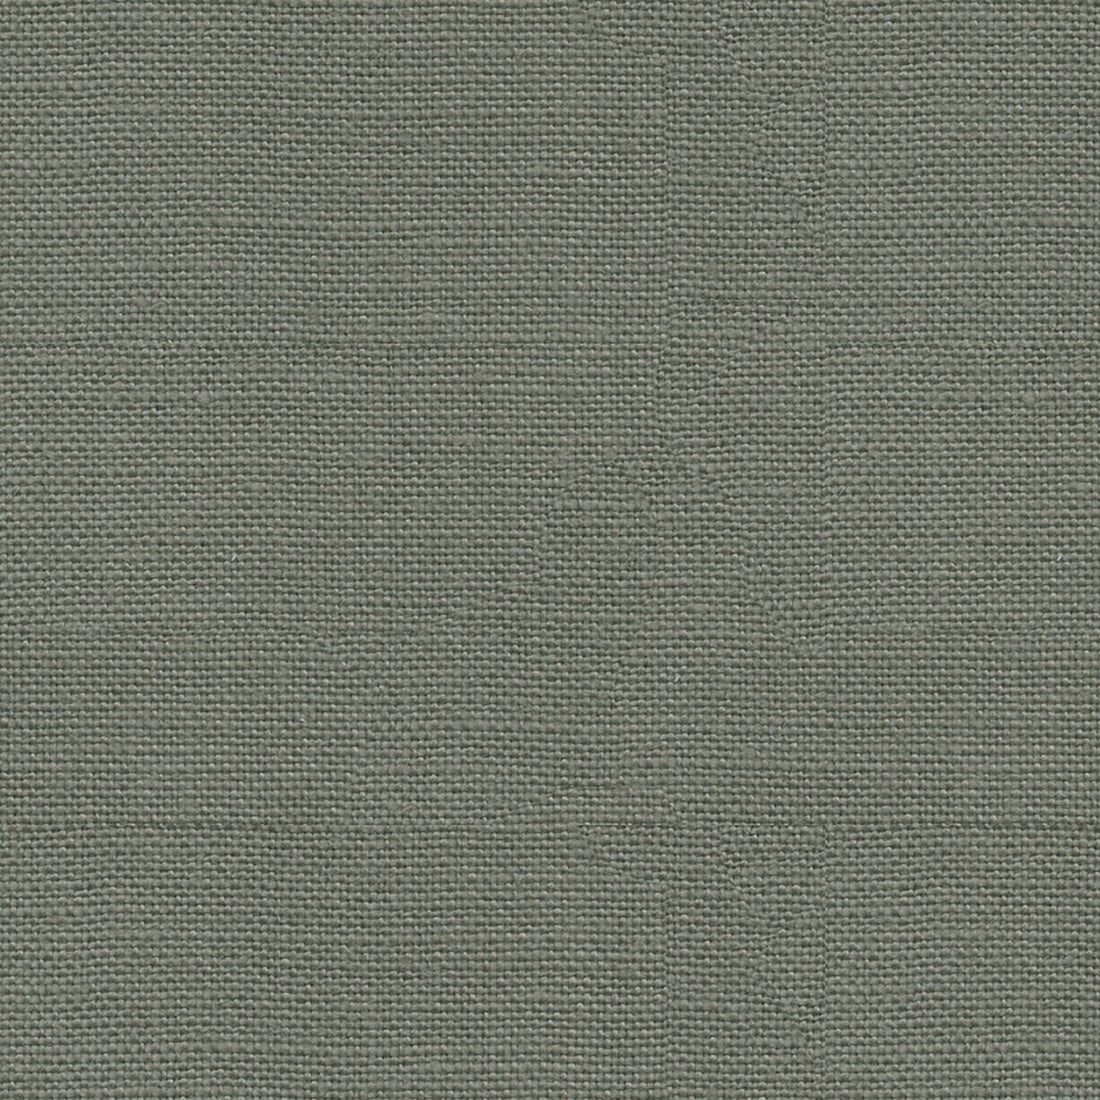 Lea fabric in pewter color - pattern J0337.945.0 - by G P &amp; J Baker in the Crayford collection